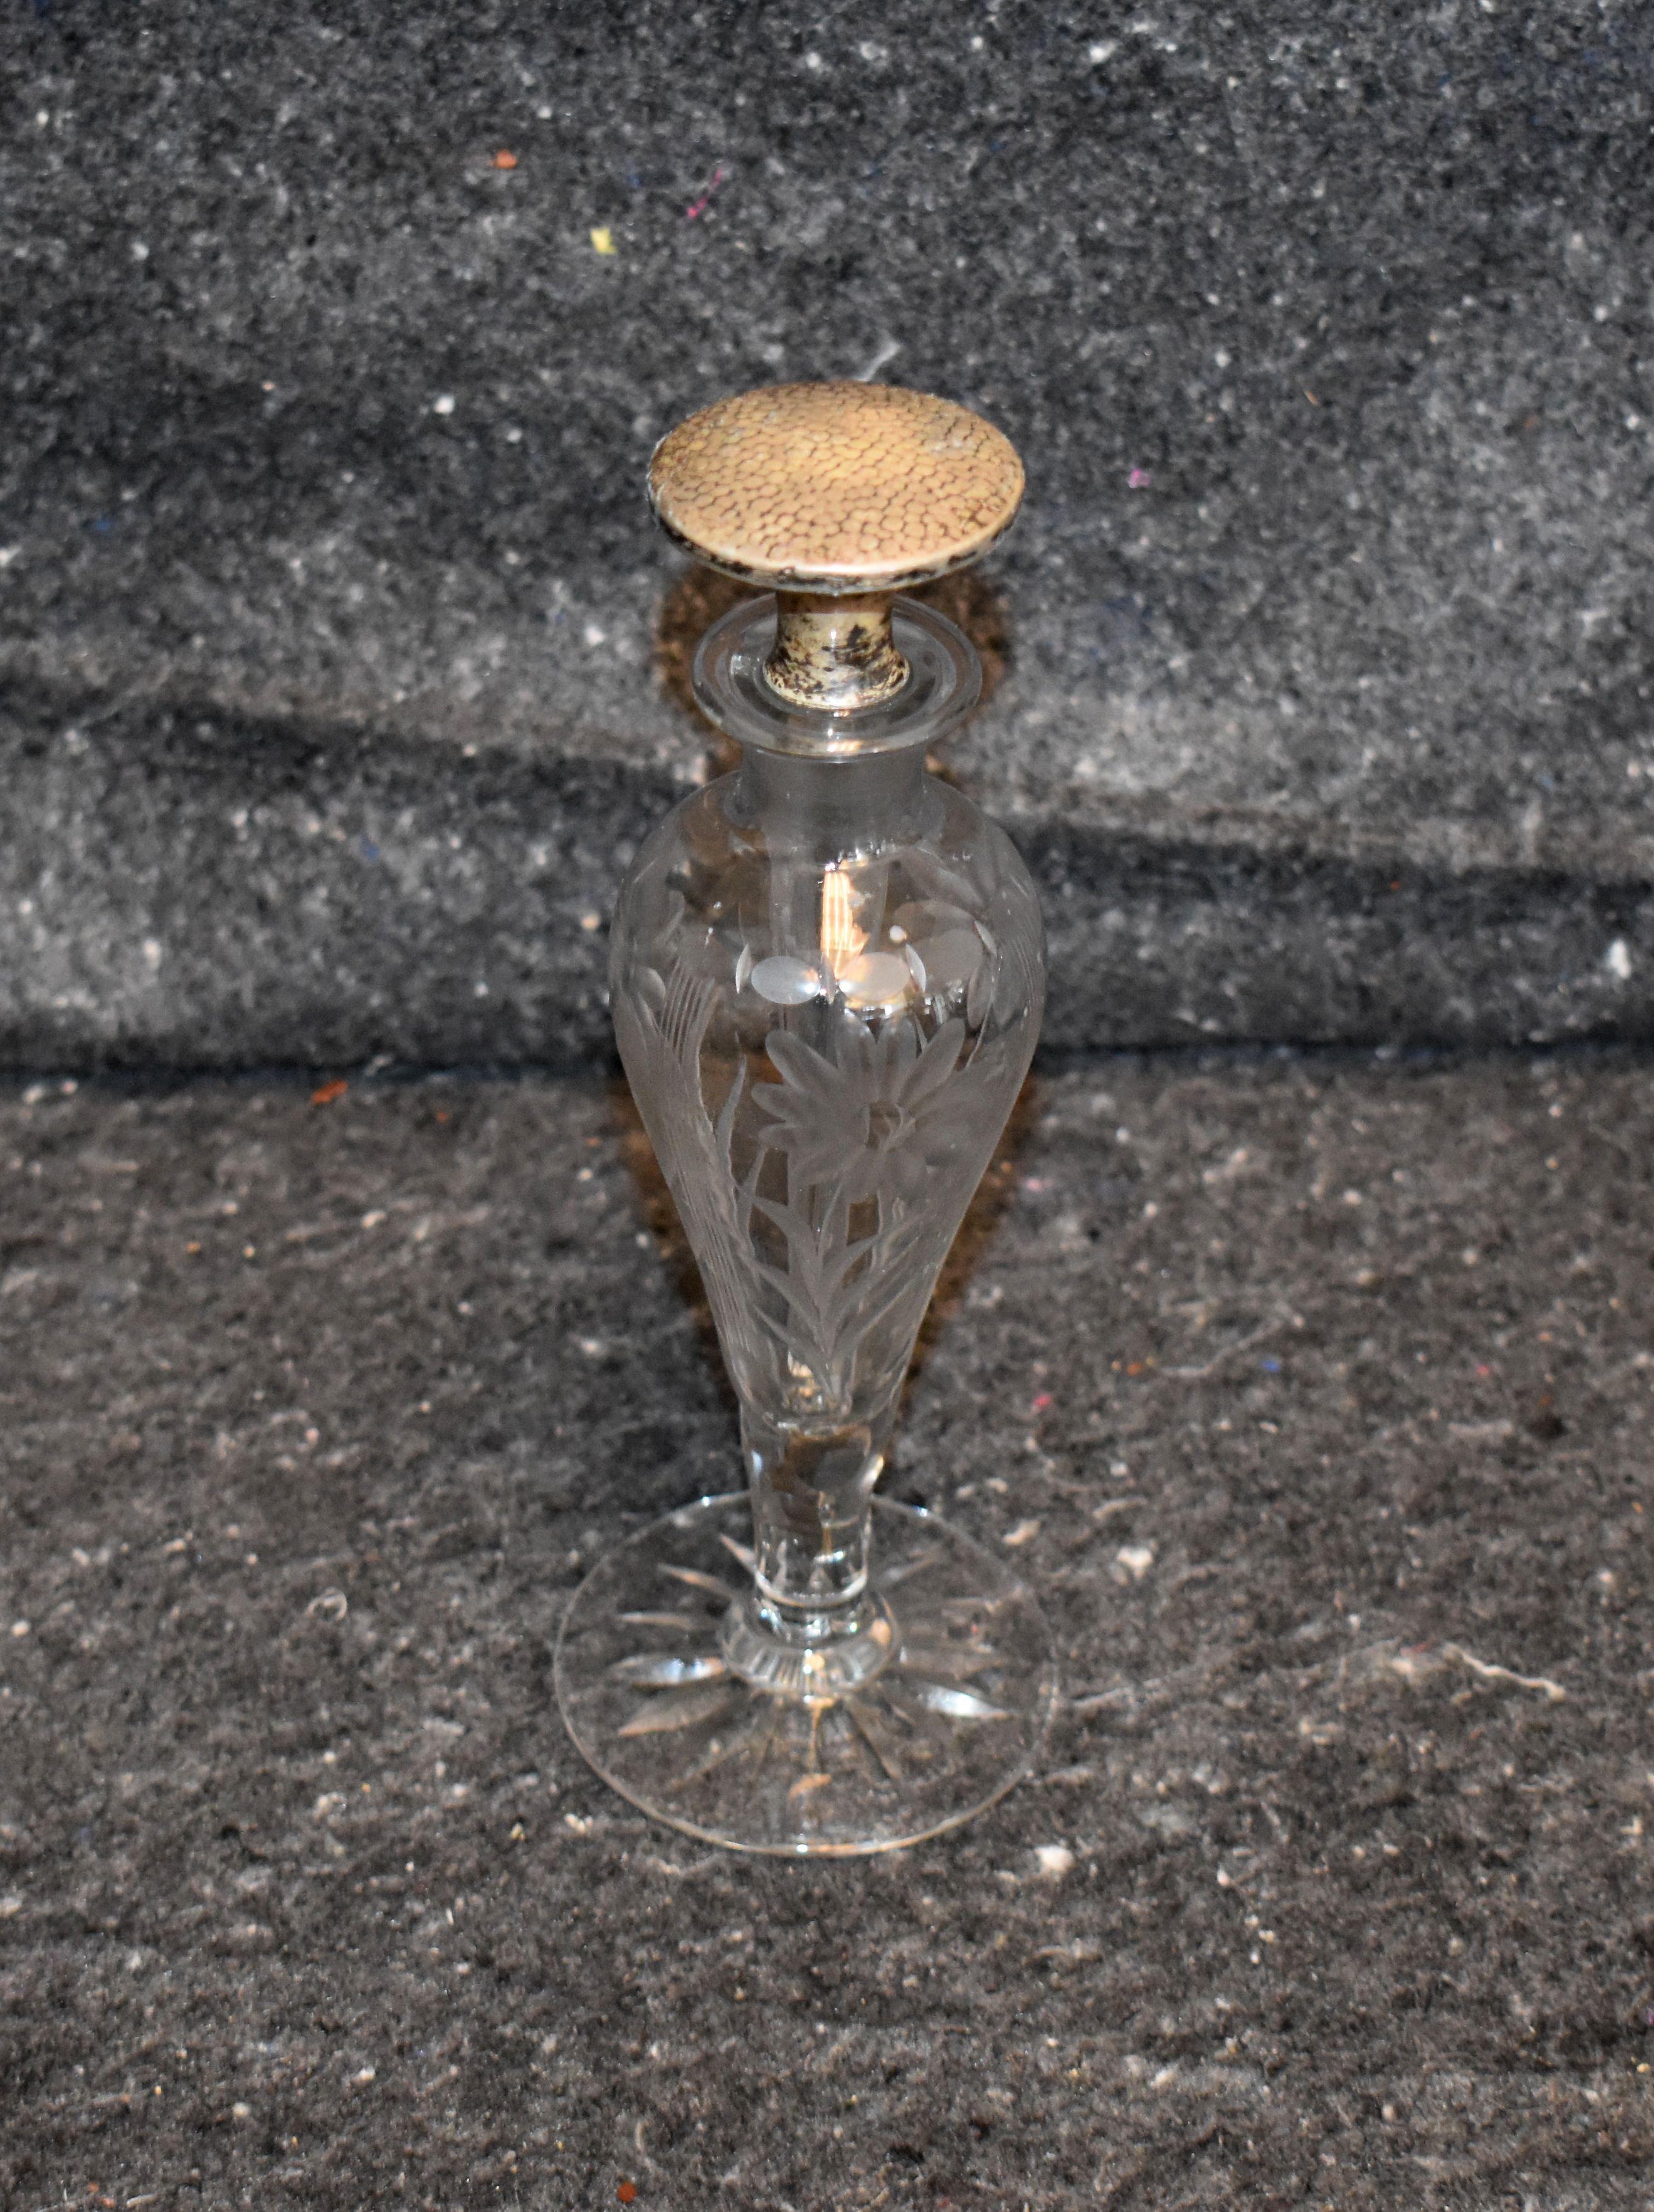 Antique sterling silver and cut glass perfume bottle with stopper.
Small chip on bottom glass dobber see picture.